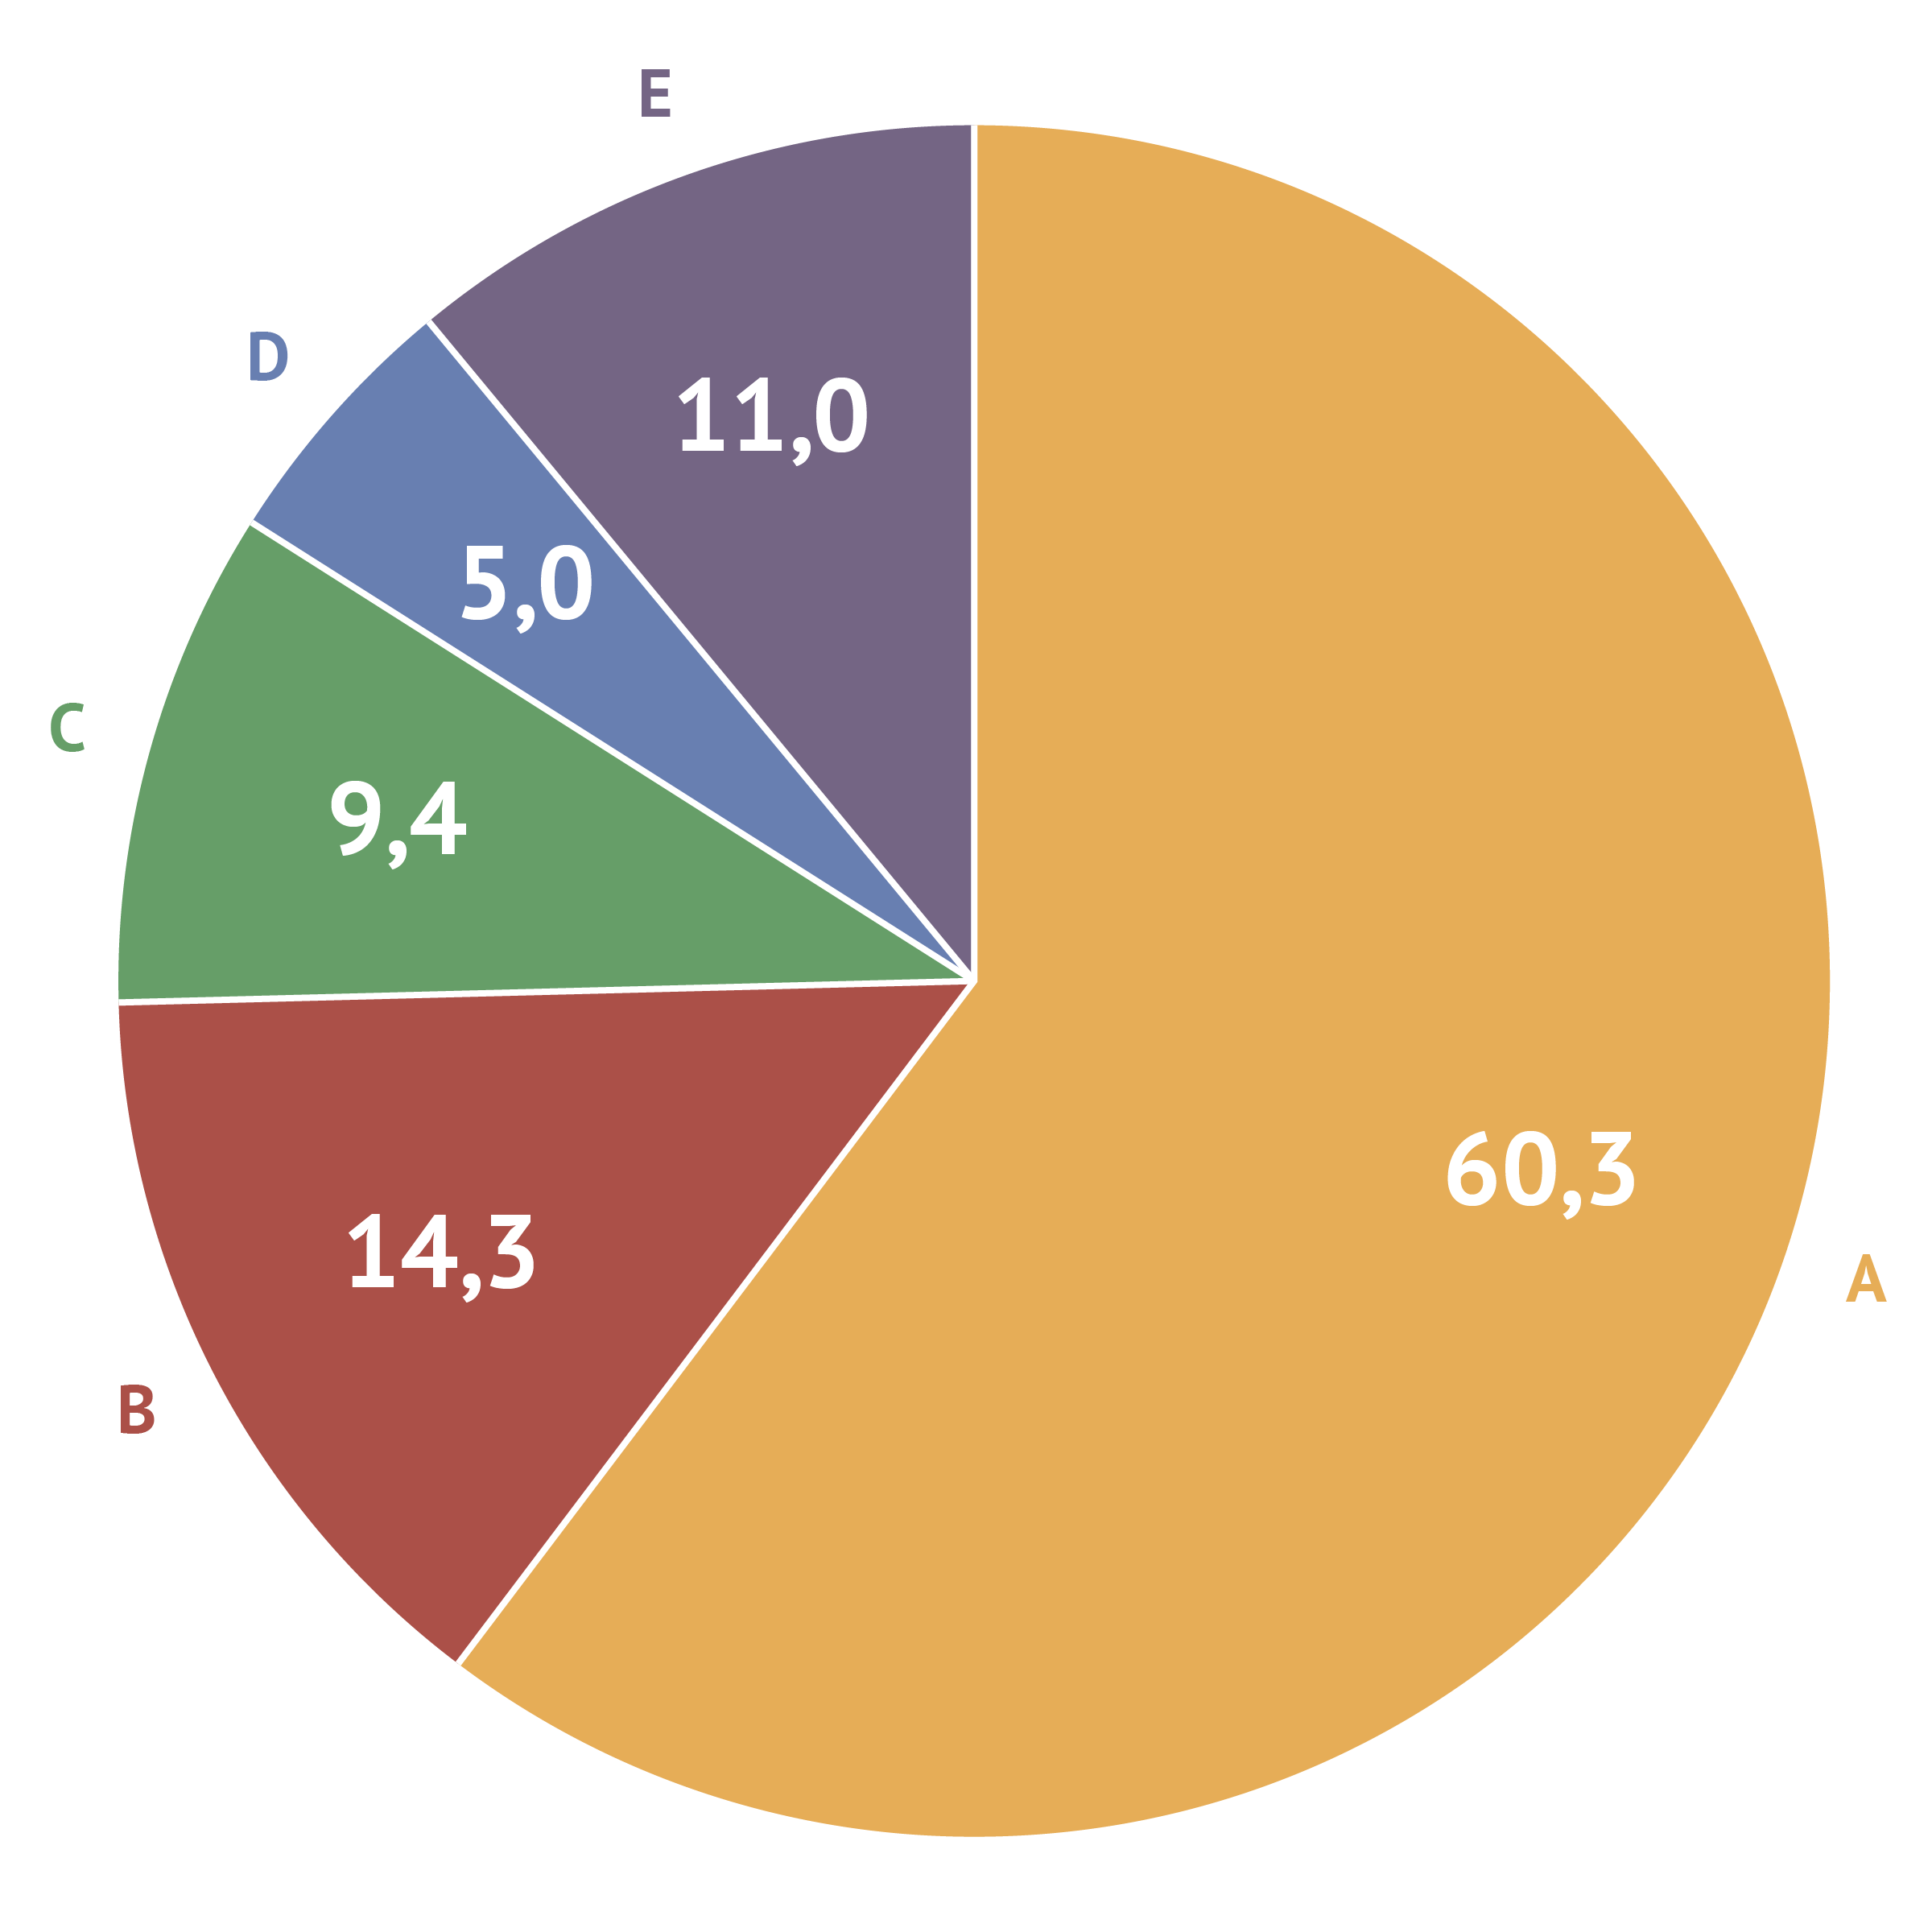 A pie chart totalling 100%, with data labels with an additional significant number